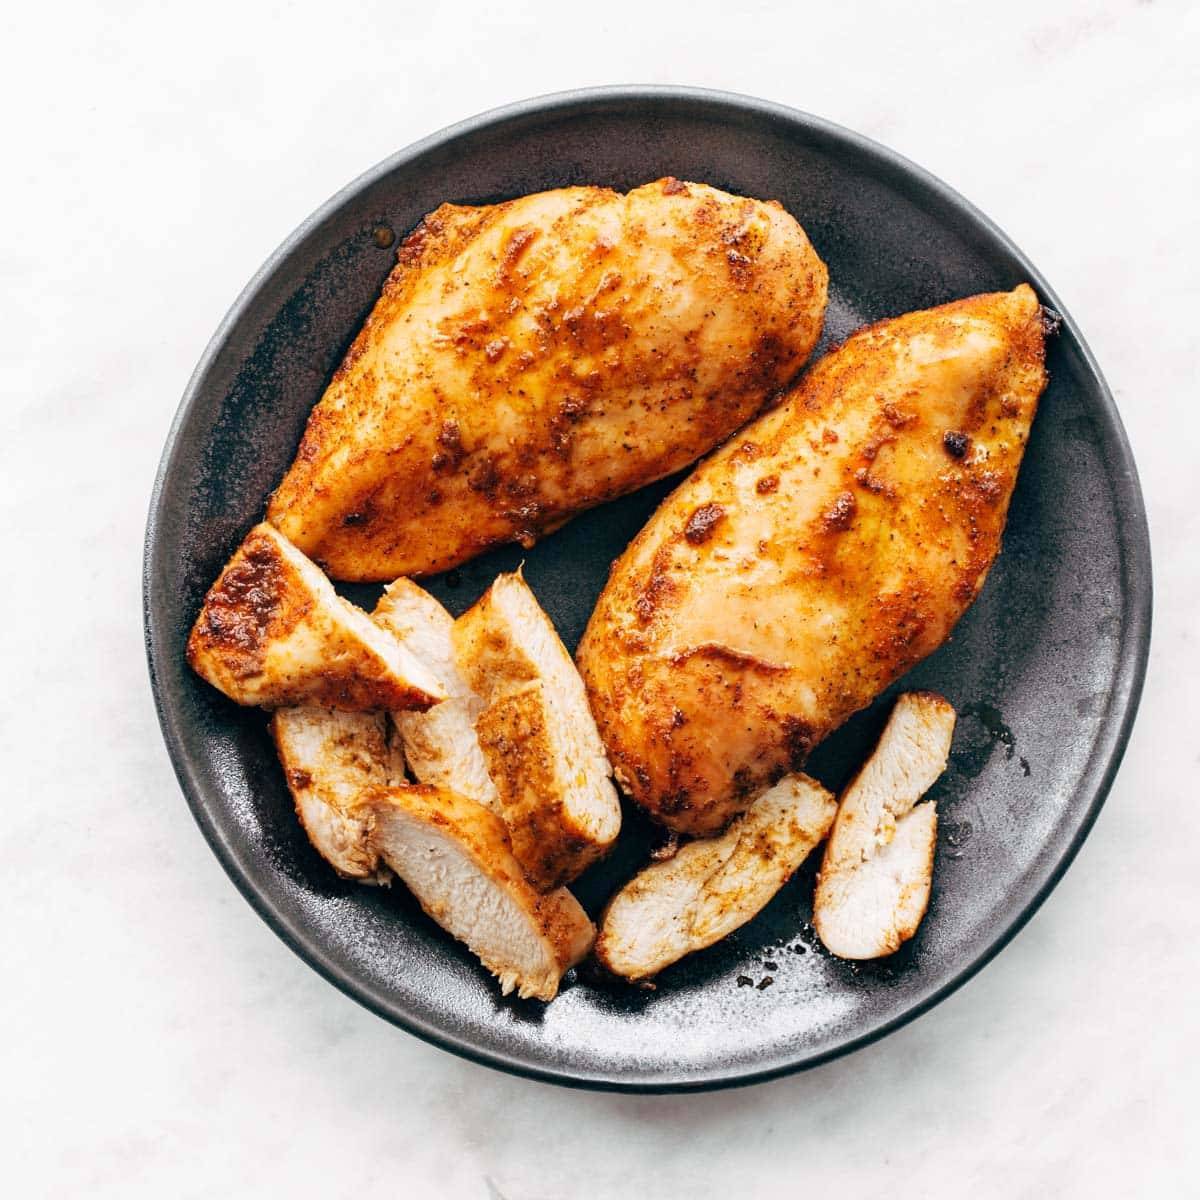 Cooked chicken breasts on a plate.